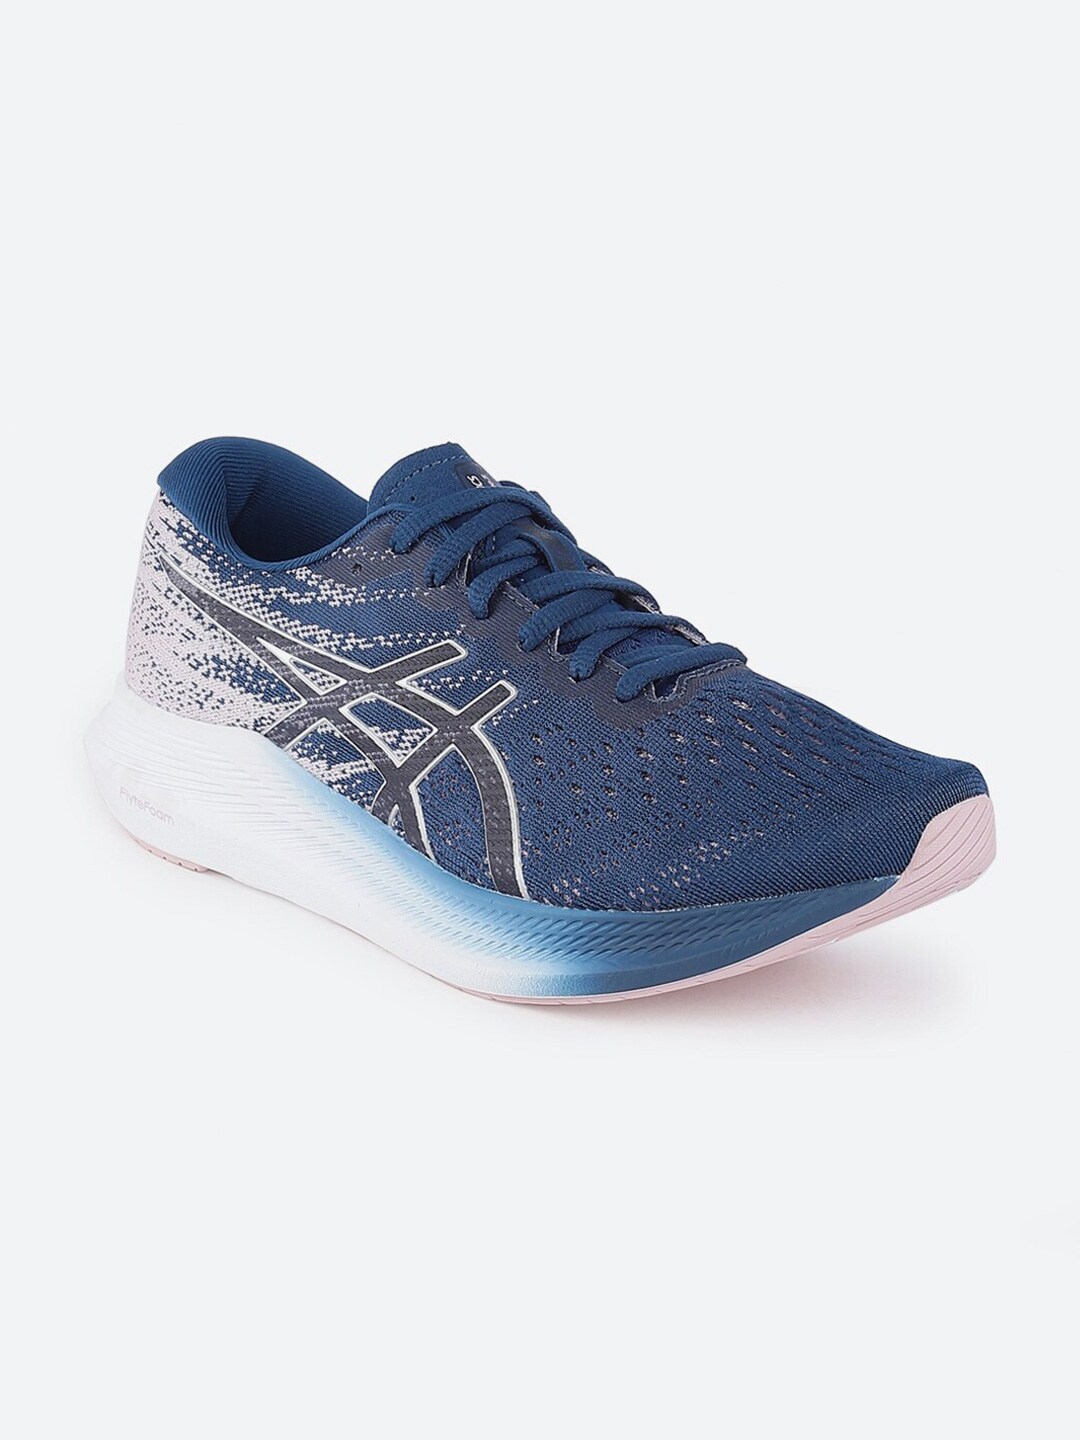 ASICS Women Blue Evoride 3 Non-Marking Running Shoes Price in India